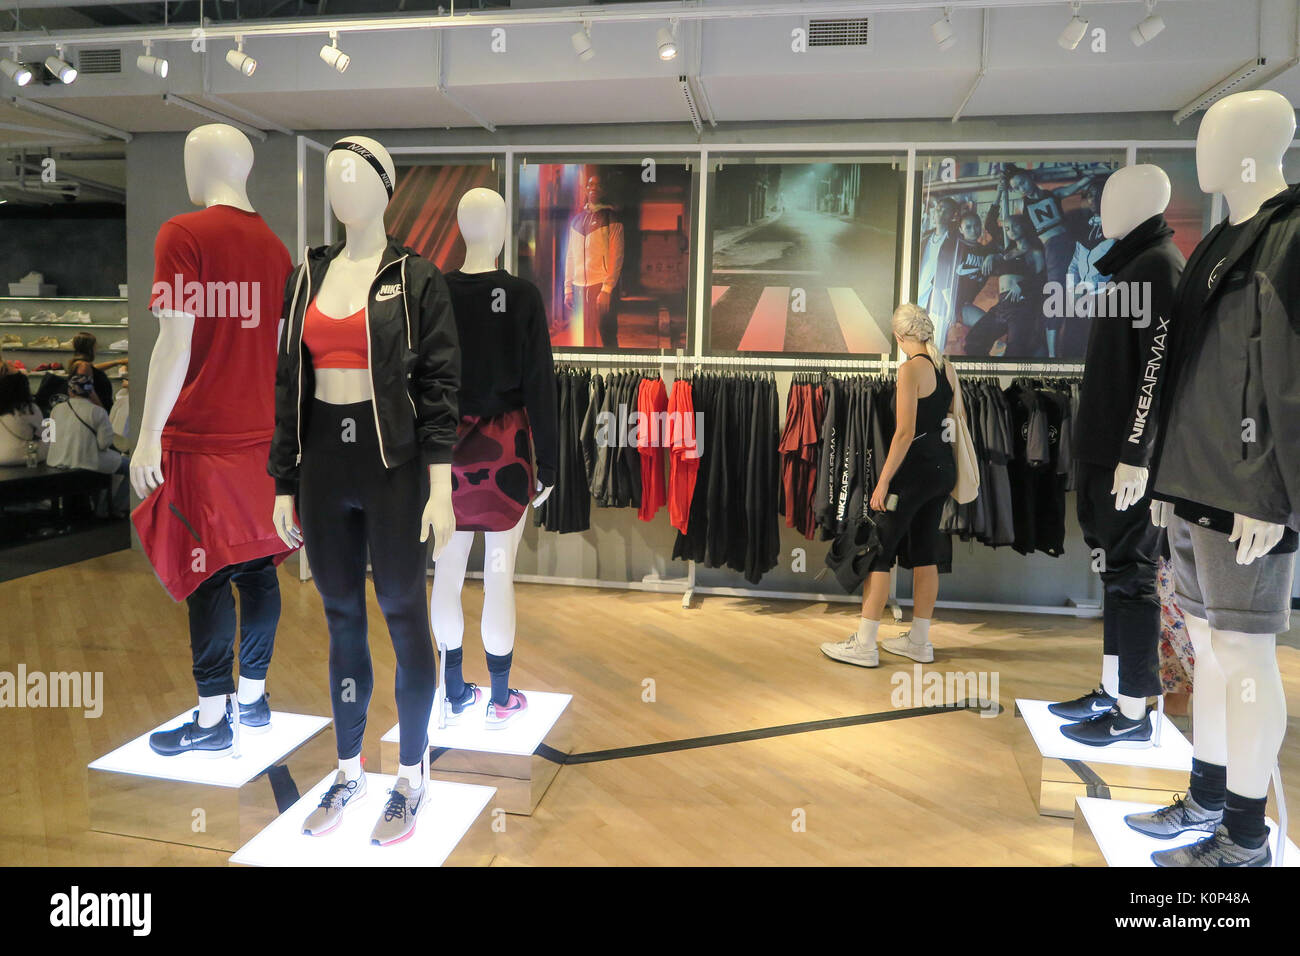 Nike Store Interior High Resolution Stock Photography and Images - Alamy